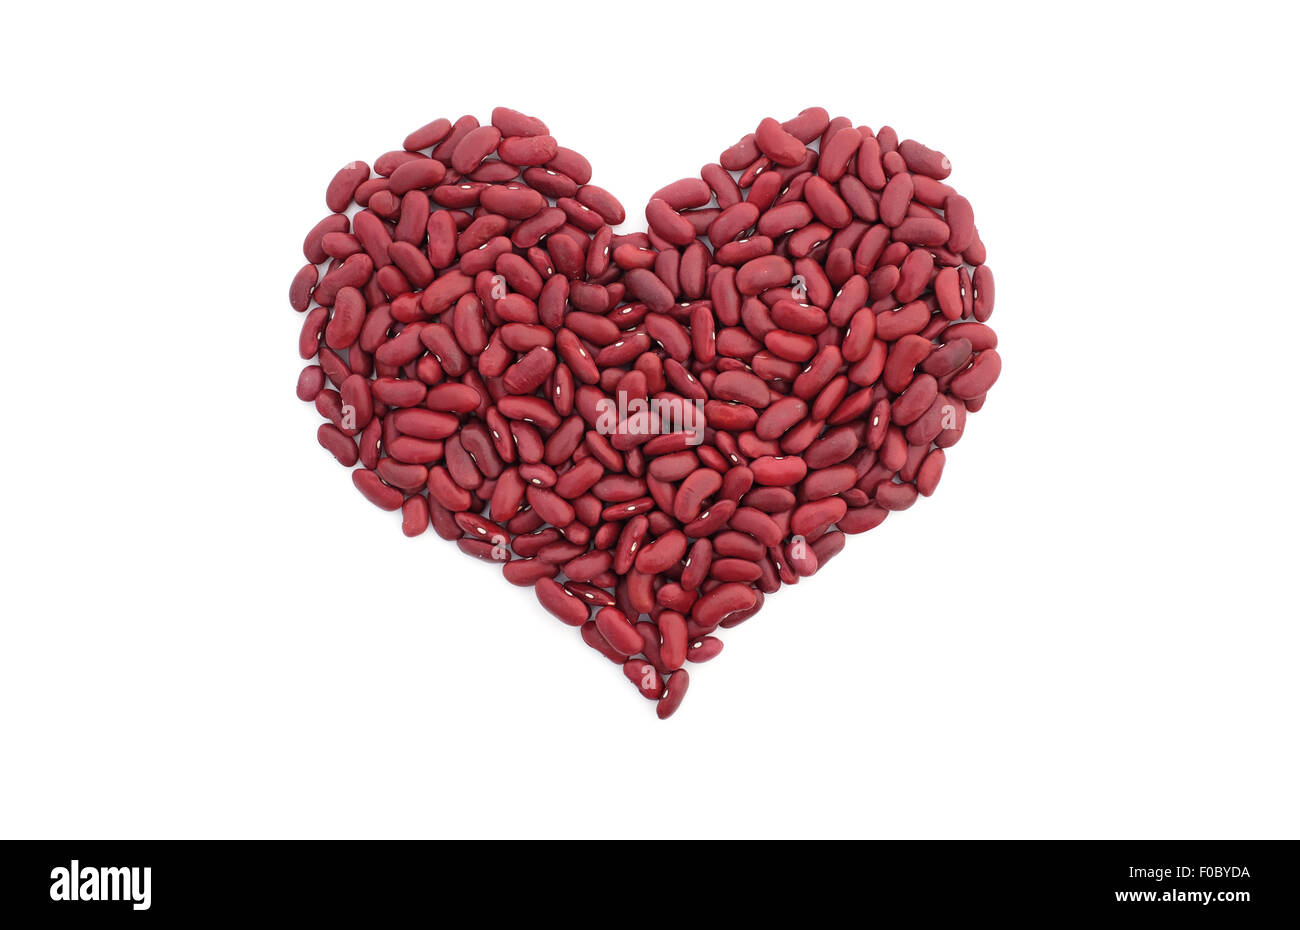 Red kidney beans in a heart shape, isolated on a white background Stock Photo